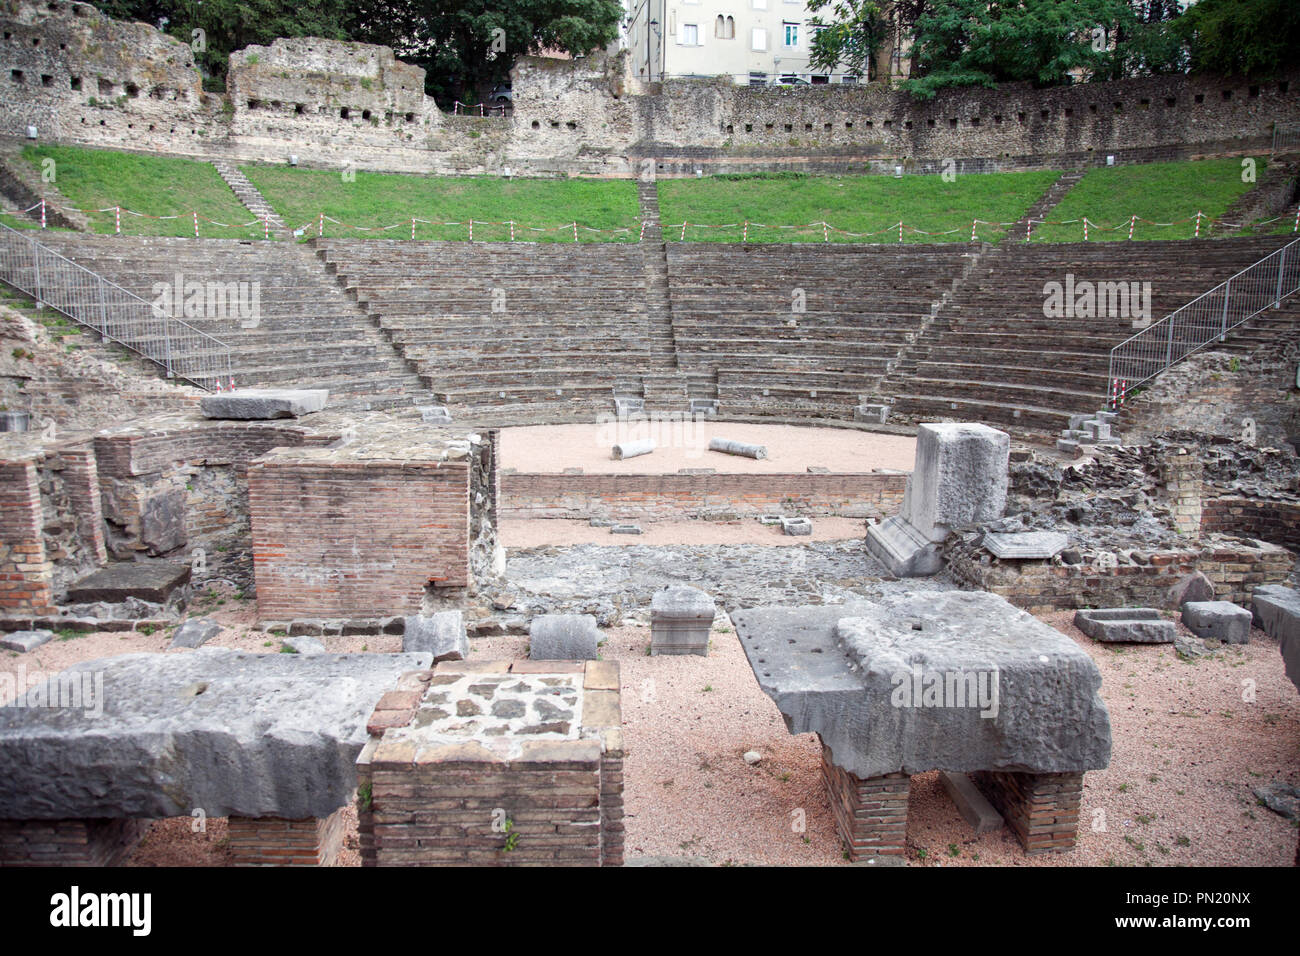 Discovered and excavated in the 1930s, Trieste's  Roman Theatre today nudges the city's commerical heart. The backing wall is original. Overall this a Stock Photo